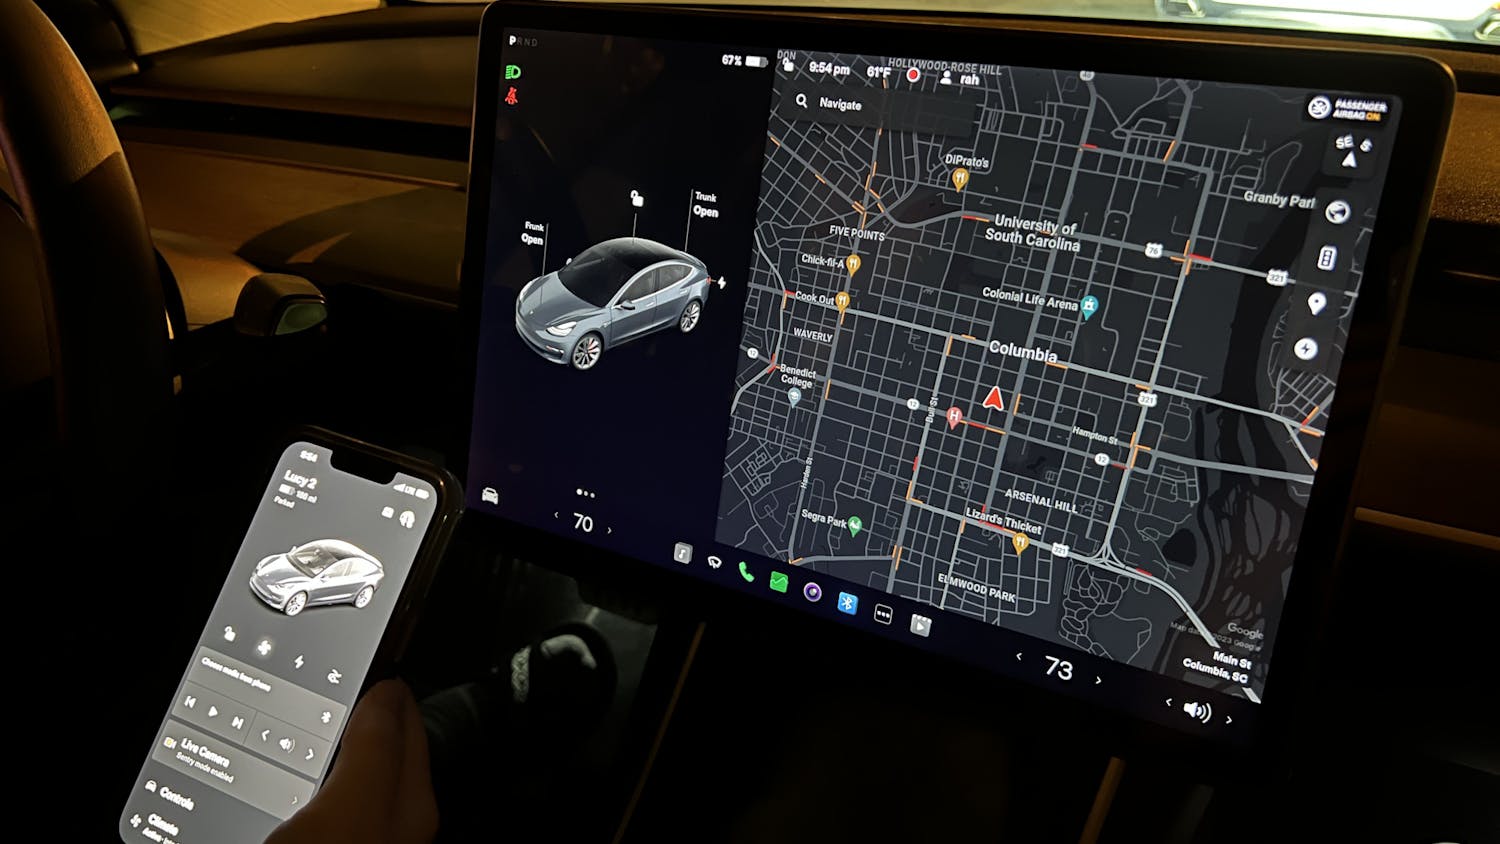 Columbia resident Laura Streit uses the Tesla app in her Tesla Model 3 to find a nearby charging station on Feb. 8, 2023. A Tesla's built-in touch screen offers an easy-to-use navigation system to help drivers locate supercharger stations and other necessities.&nbsp;